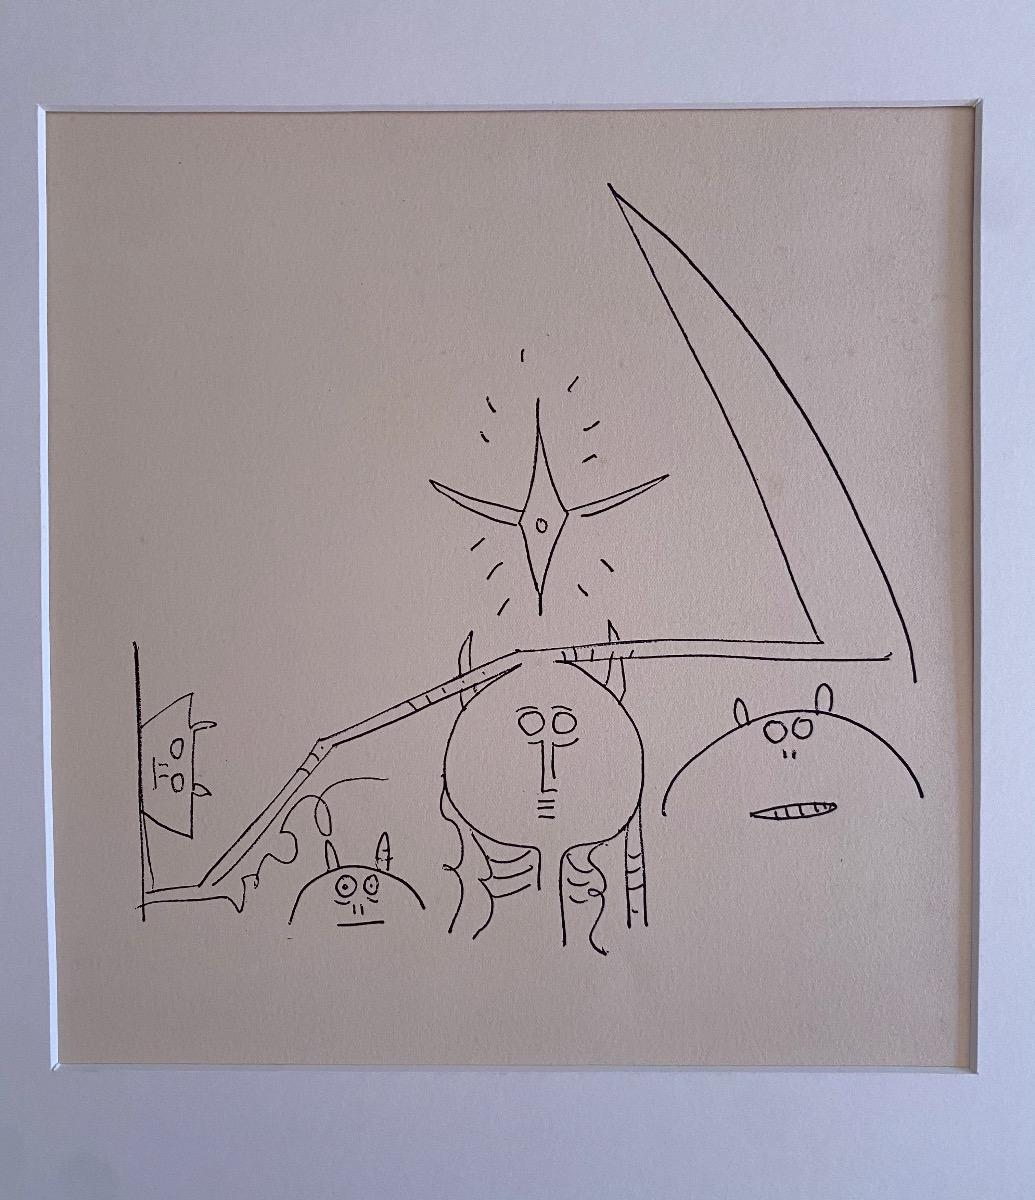 Wilfredo Lam Abstract Print - Composition - Lithograph by Wifredo Lam - 1970s